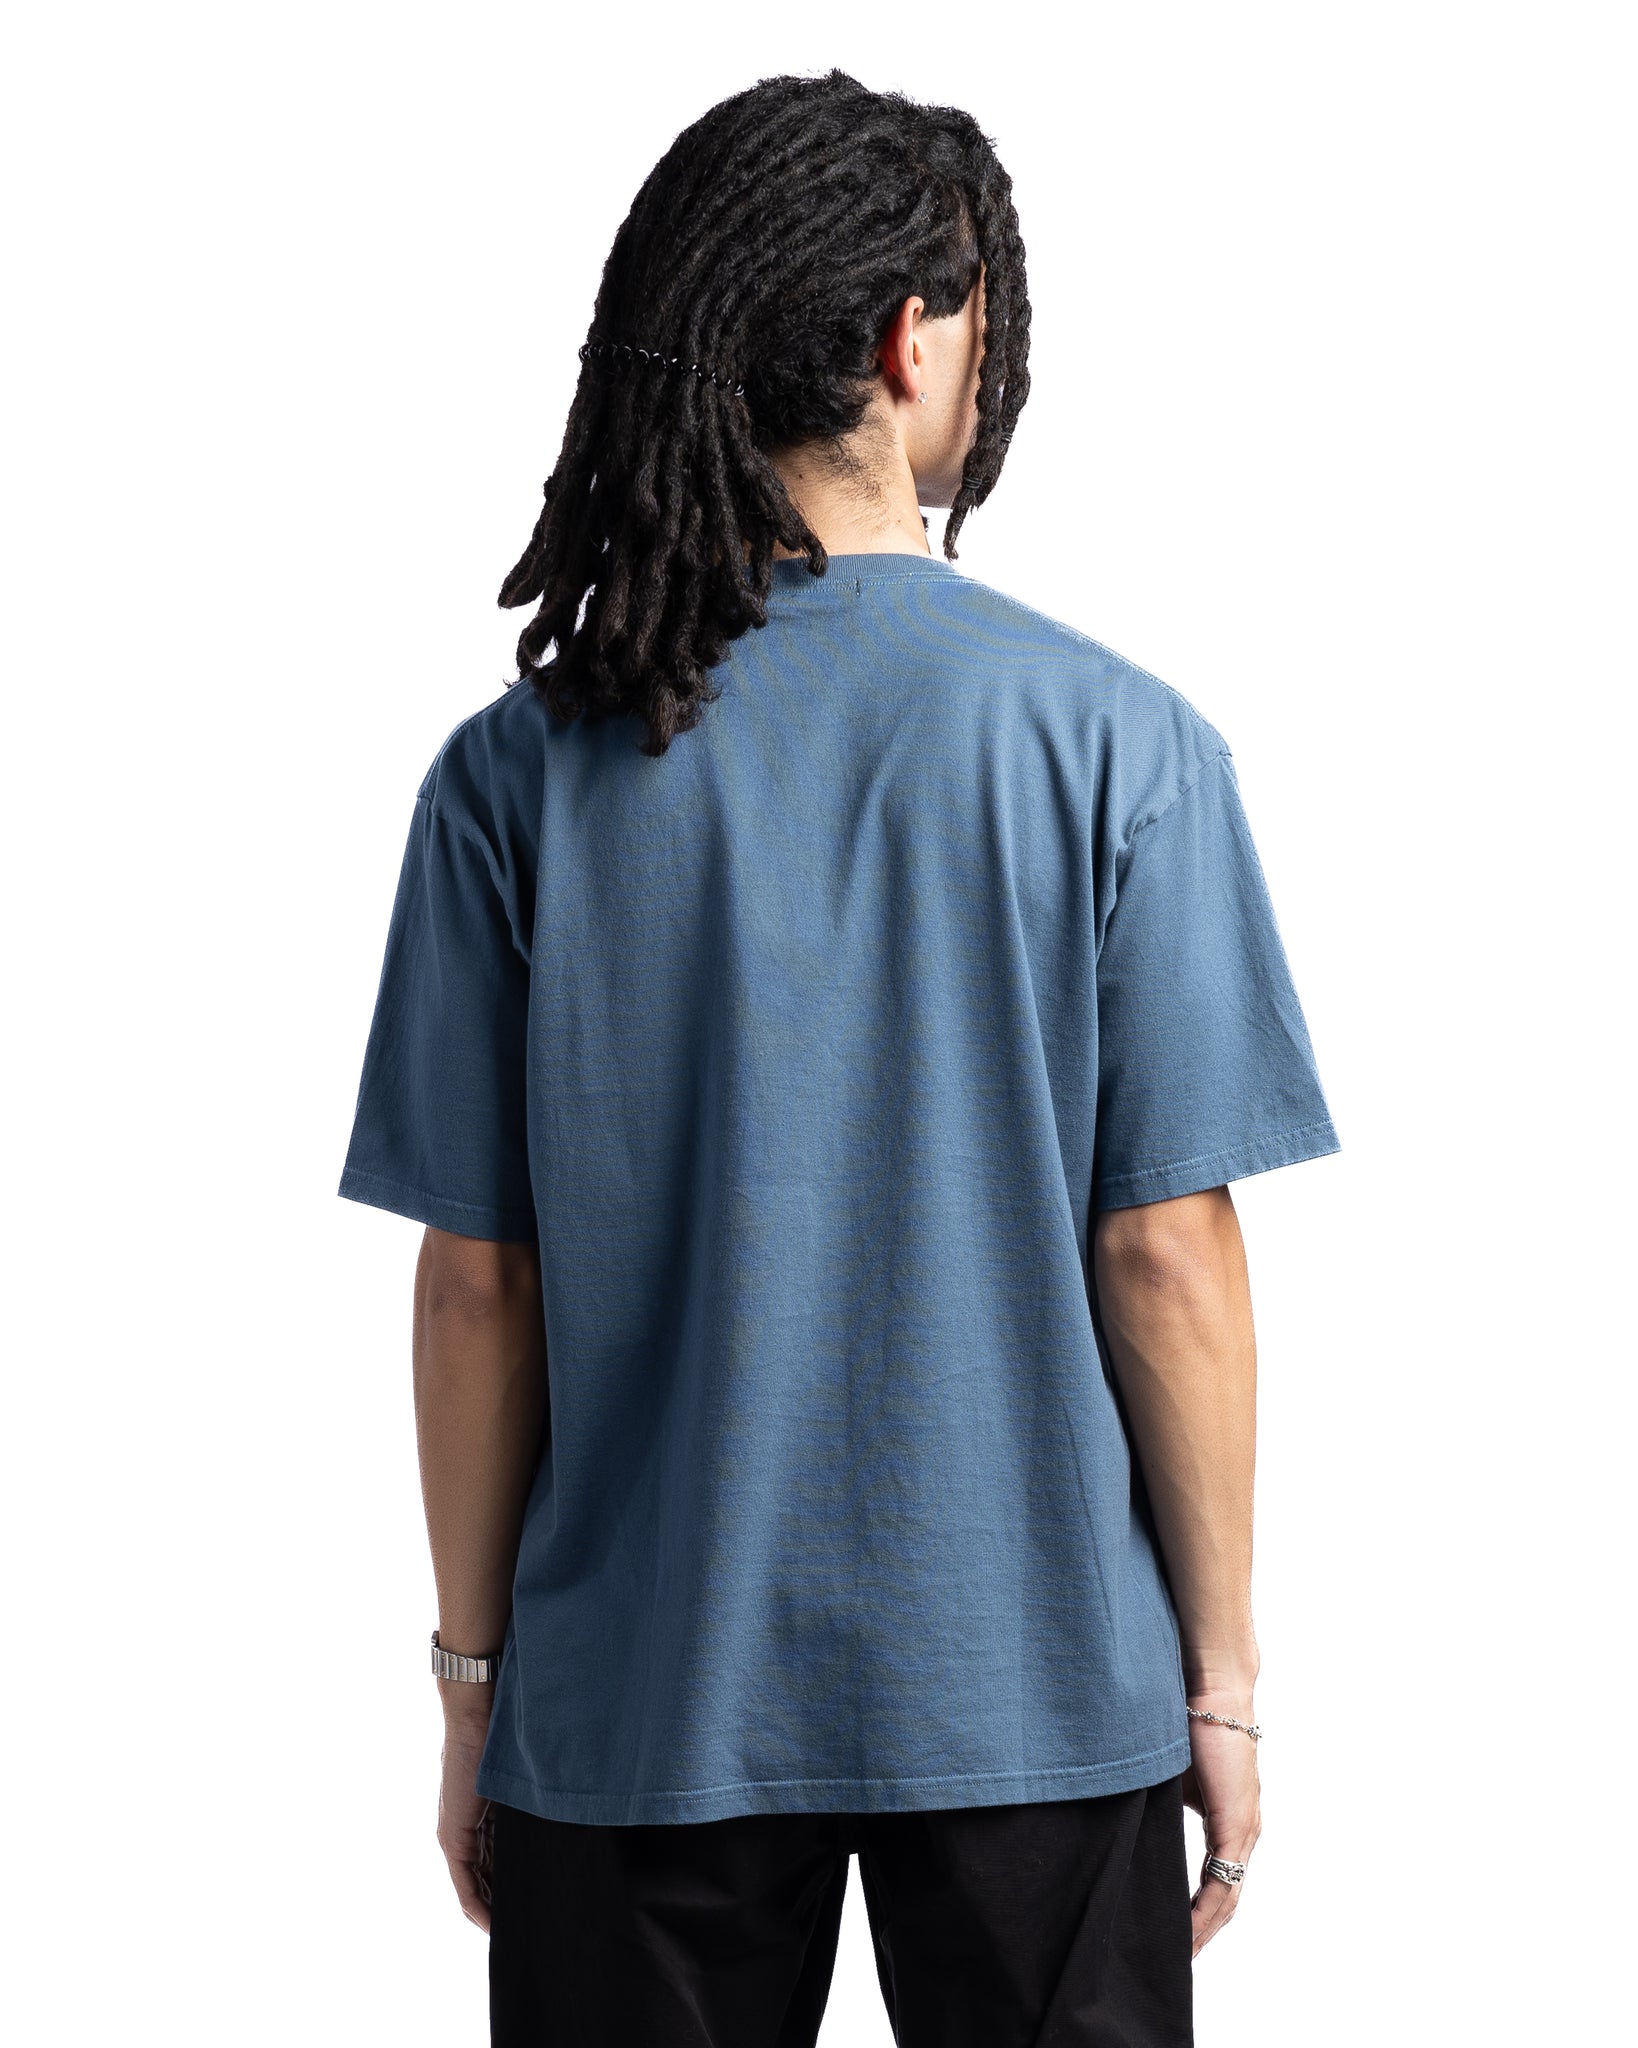 Undercover UC2C3808 Graphic Tee Grey Blue